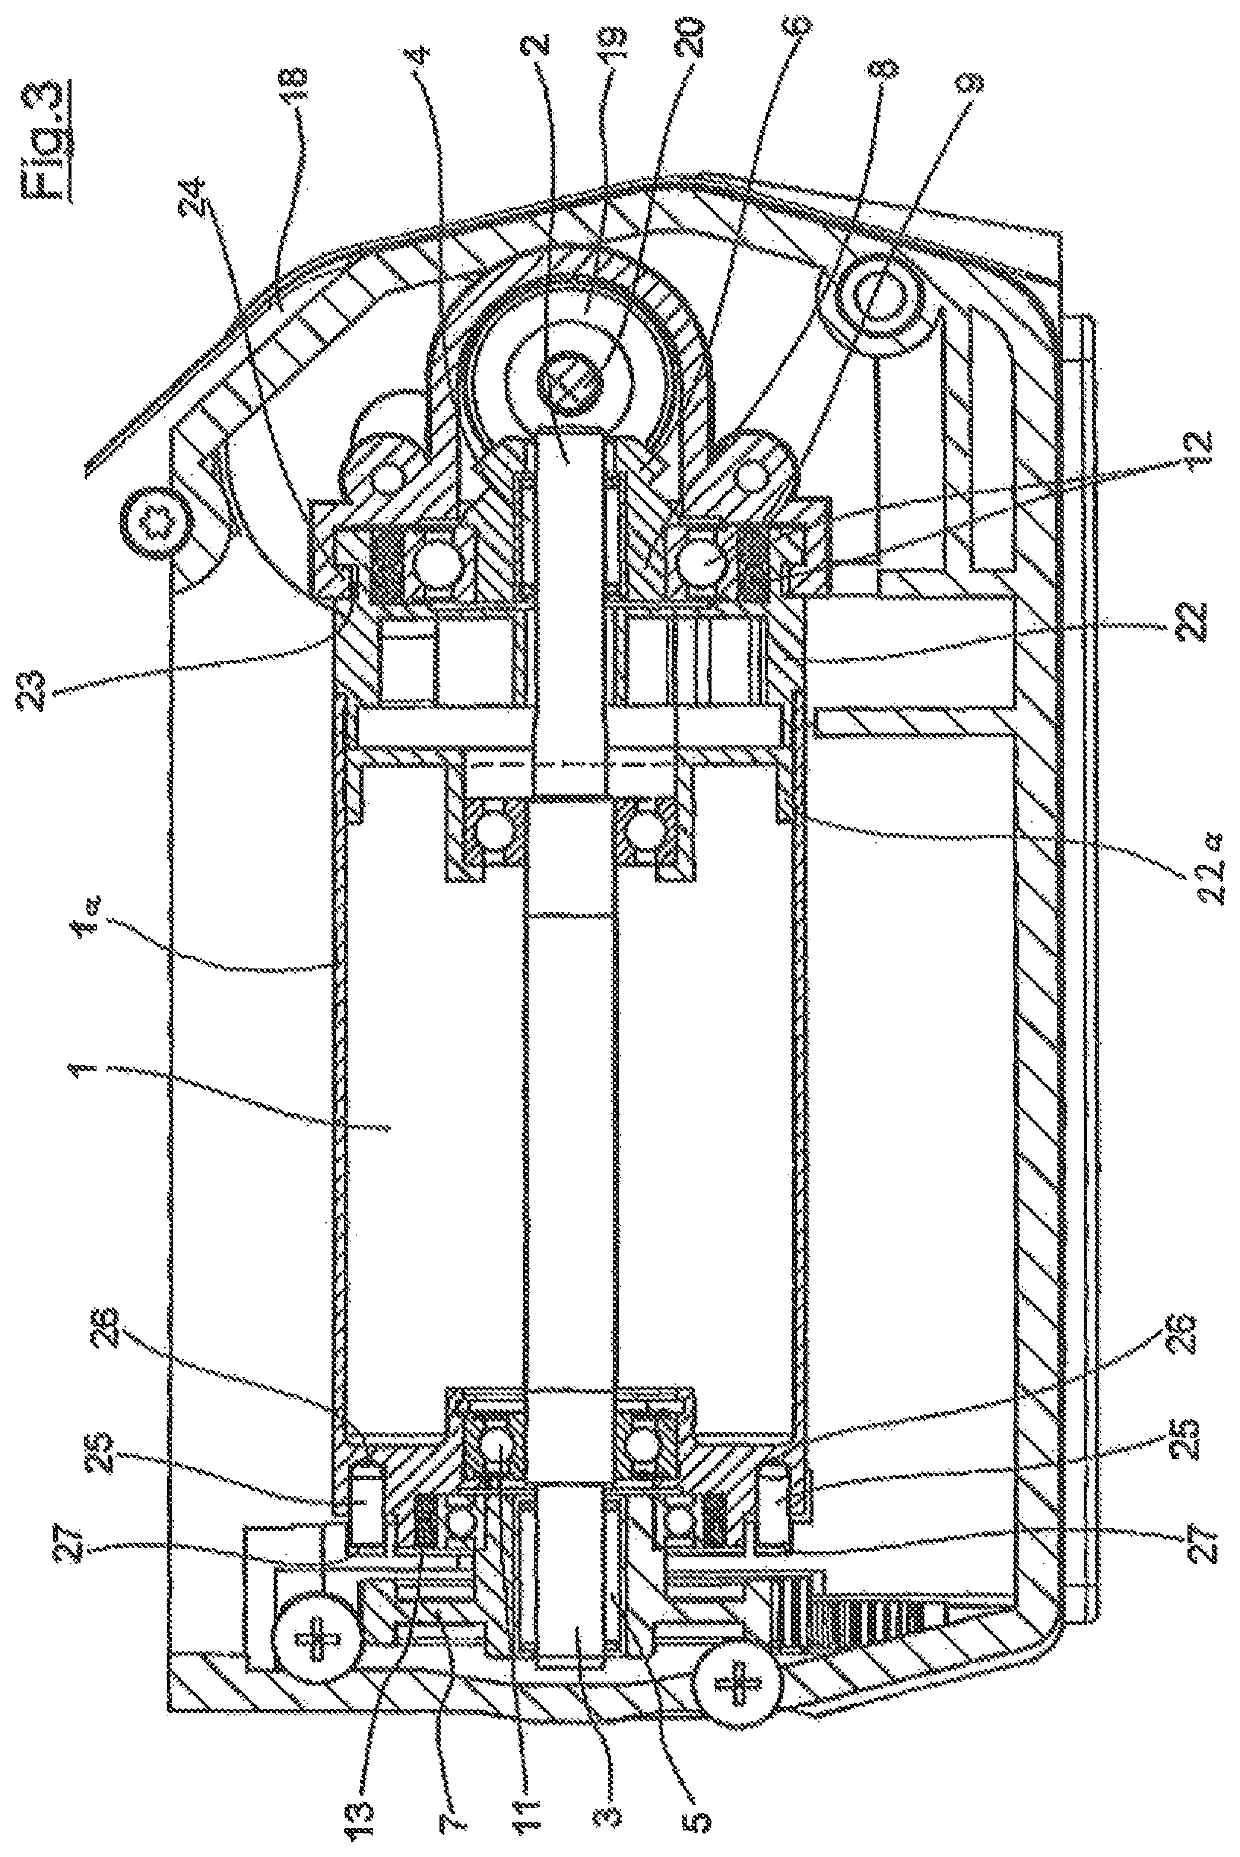 Drive unit for a strapping device